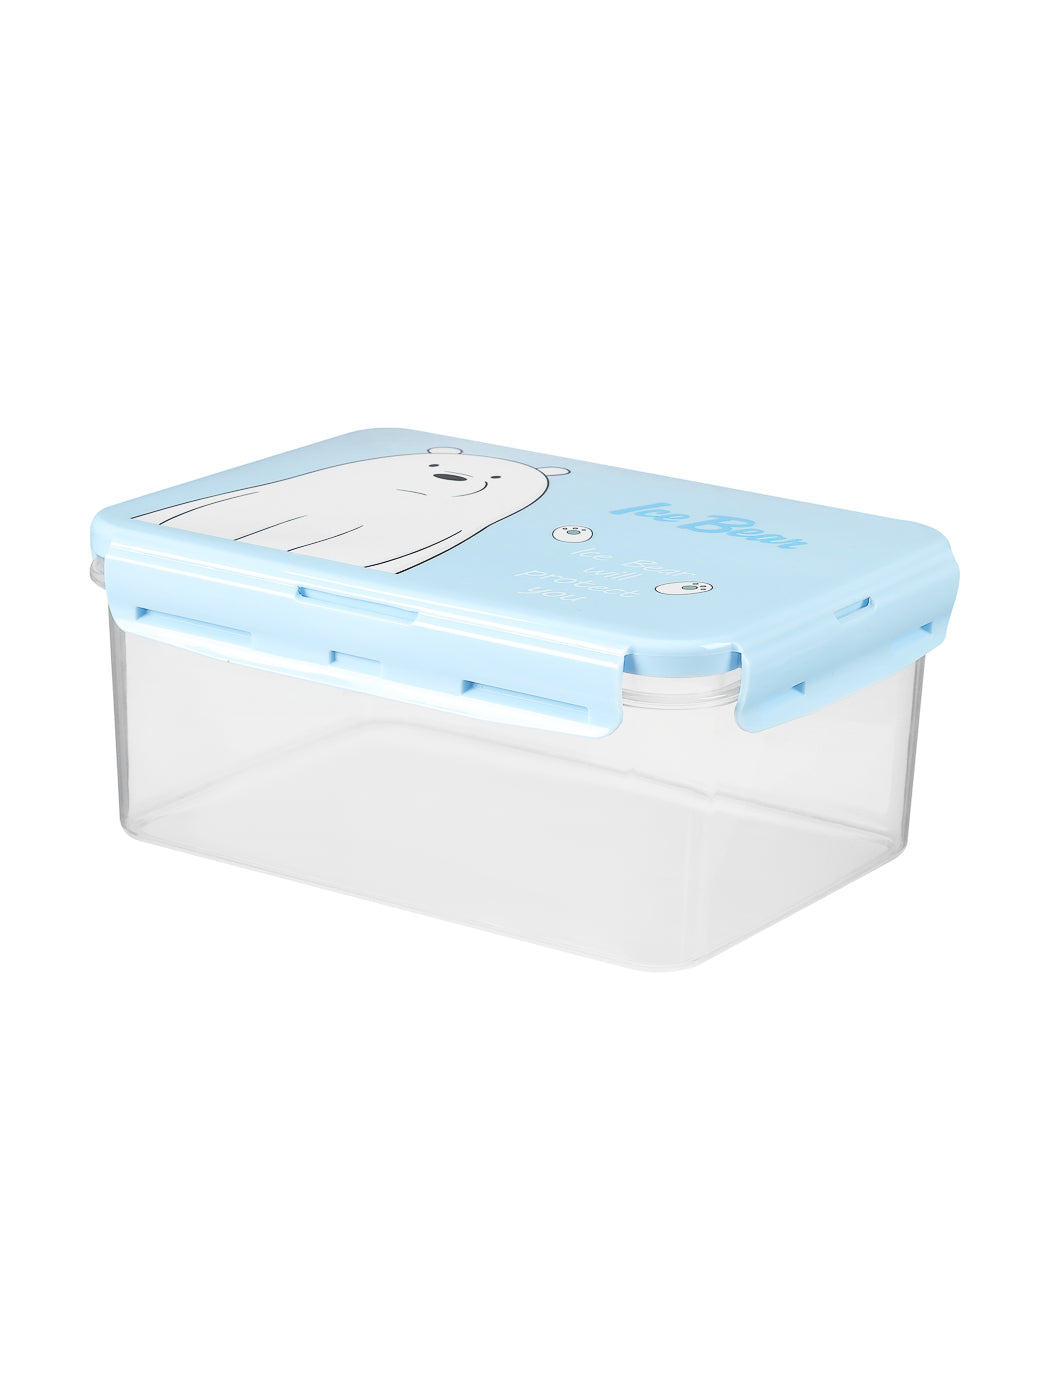 MINISO FOOD CONTAINER LARGE-2250ML 2008606910103 FOOD CONTAINER